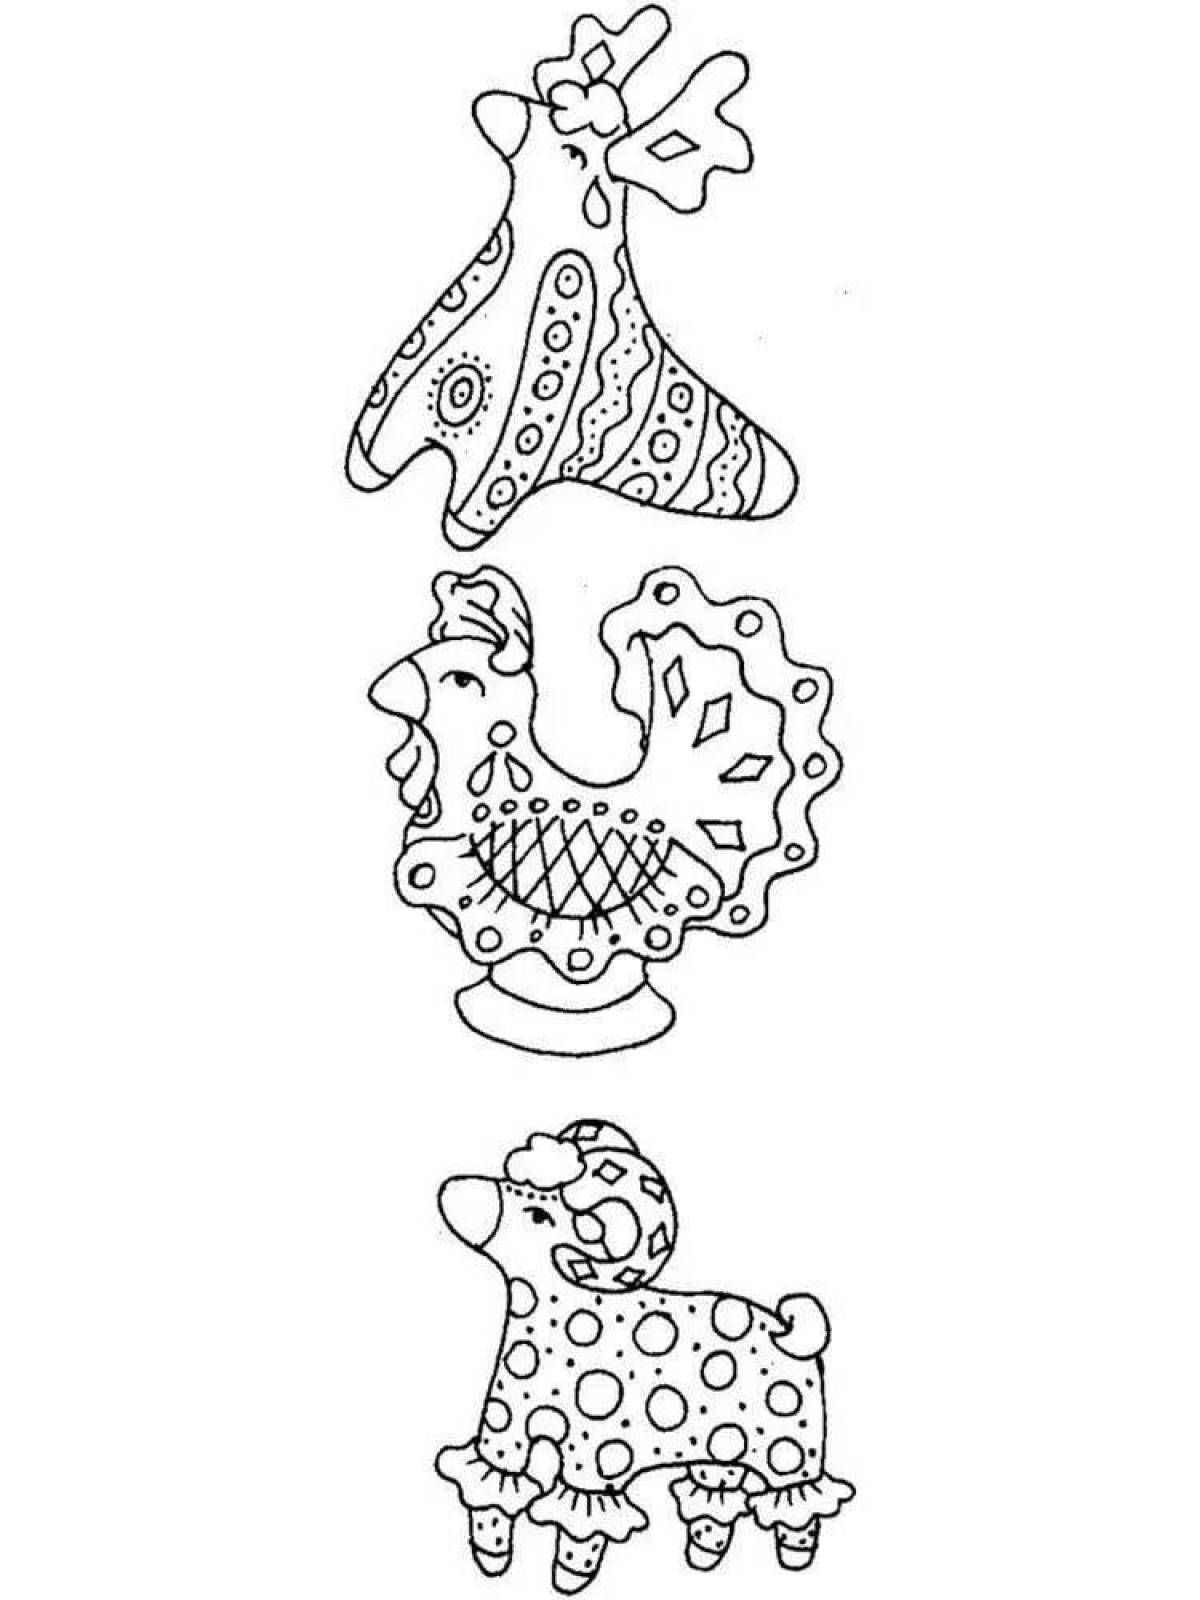 Pattern of a playful Dymkovo toy for preschoolers